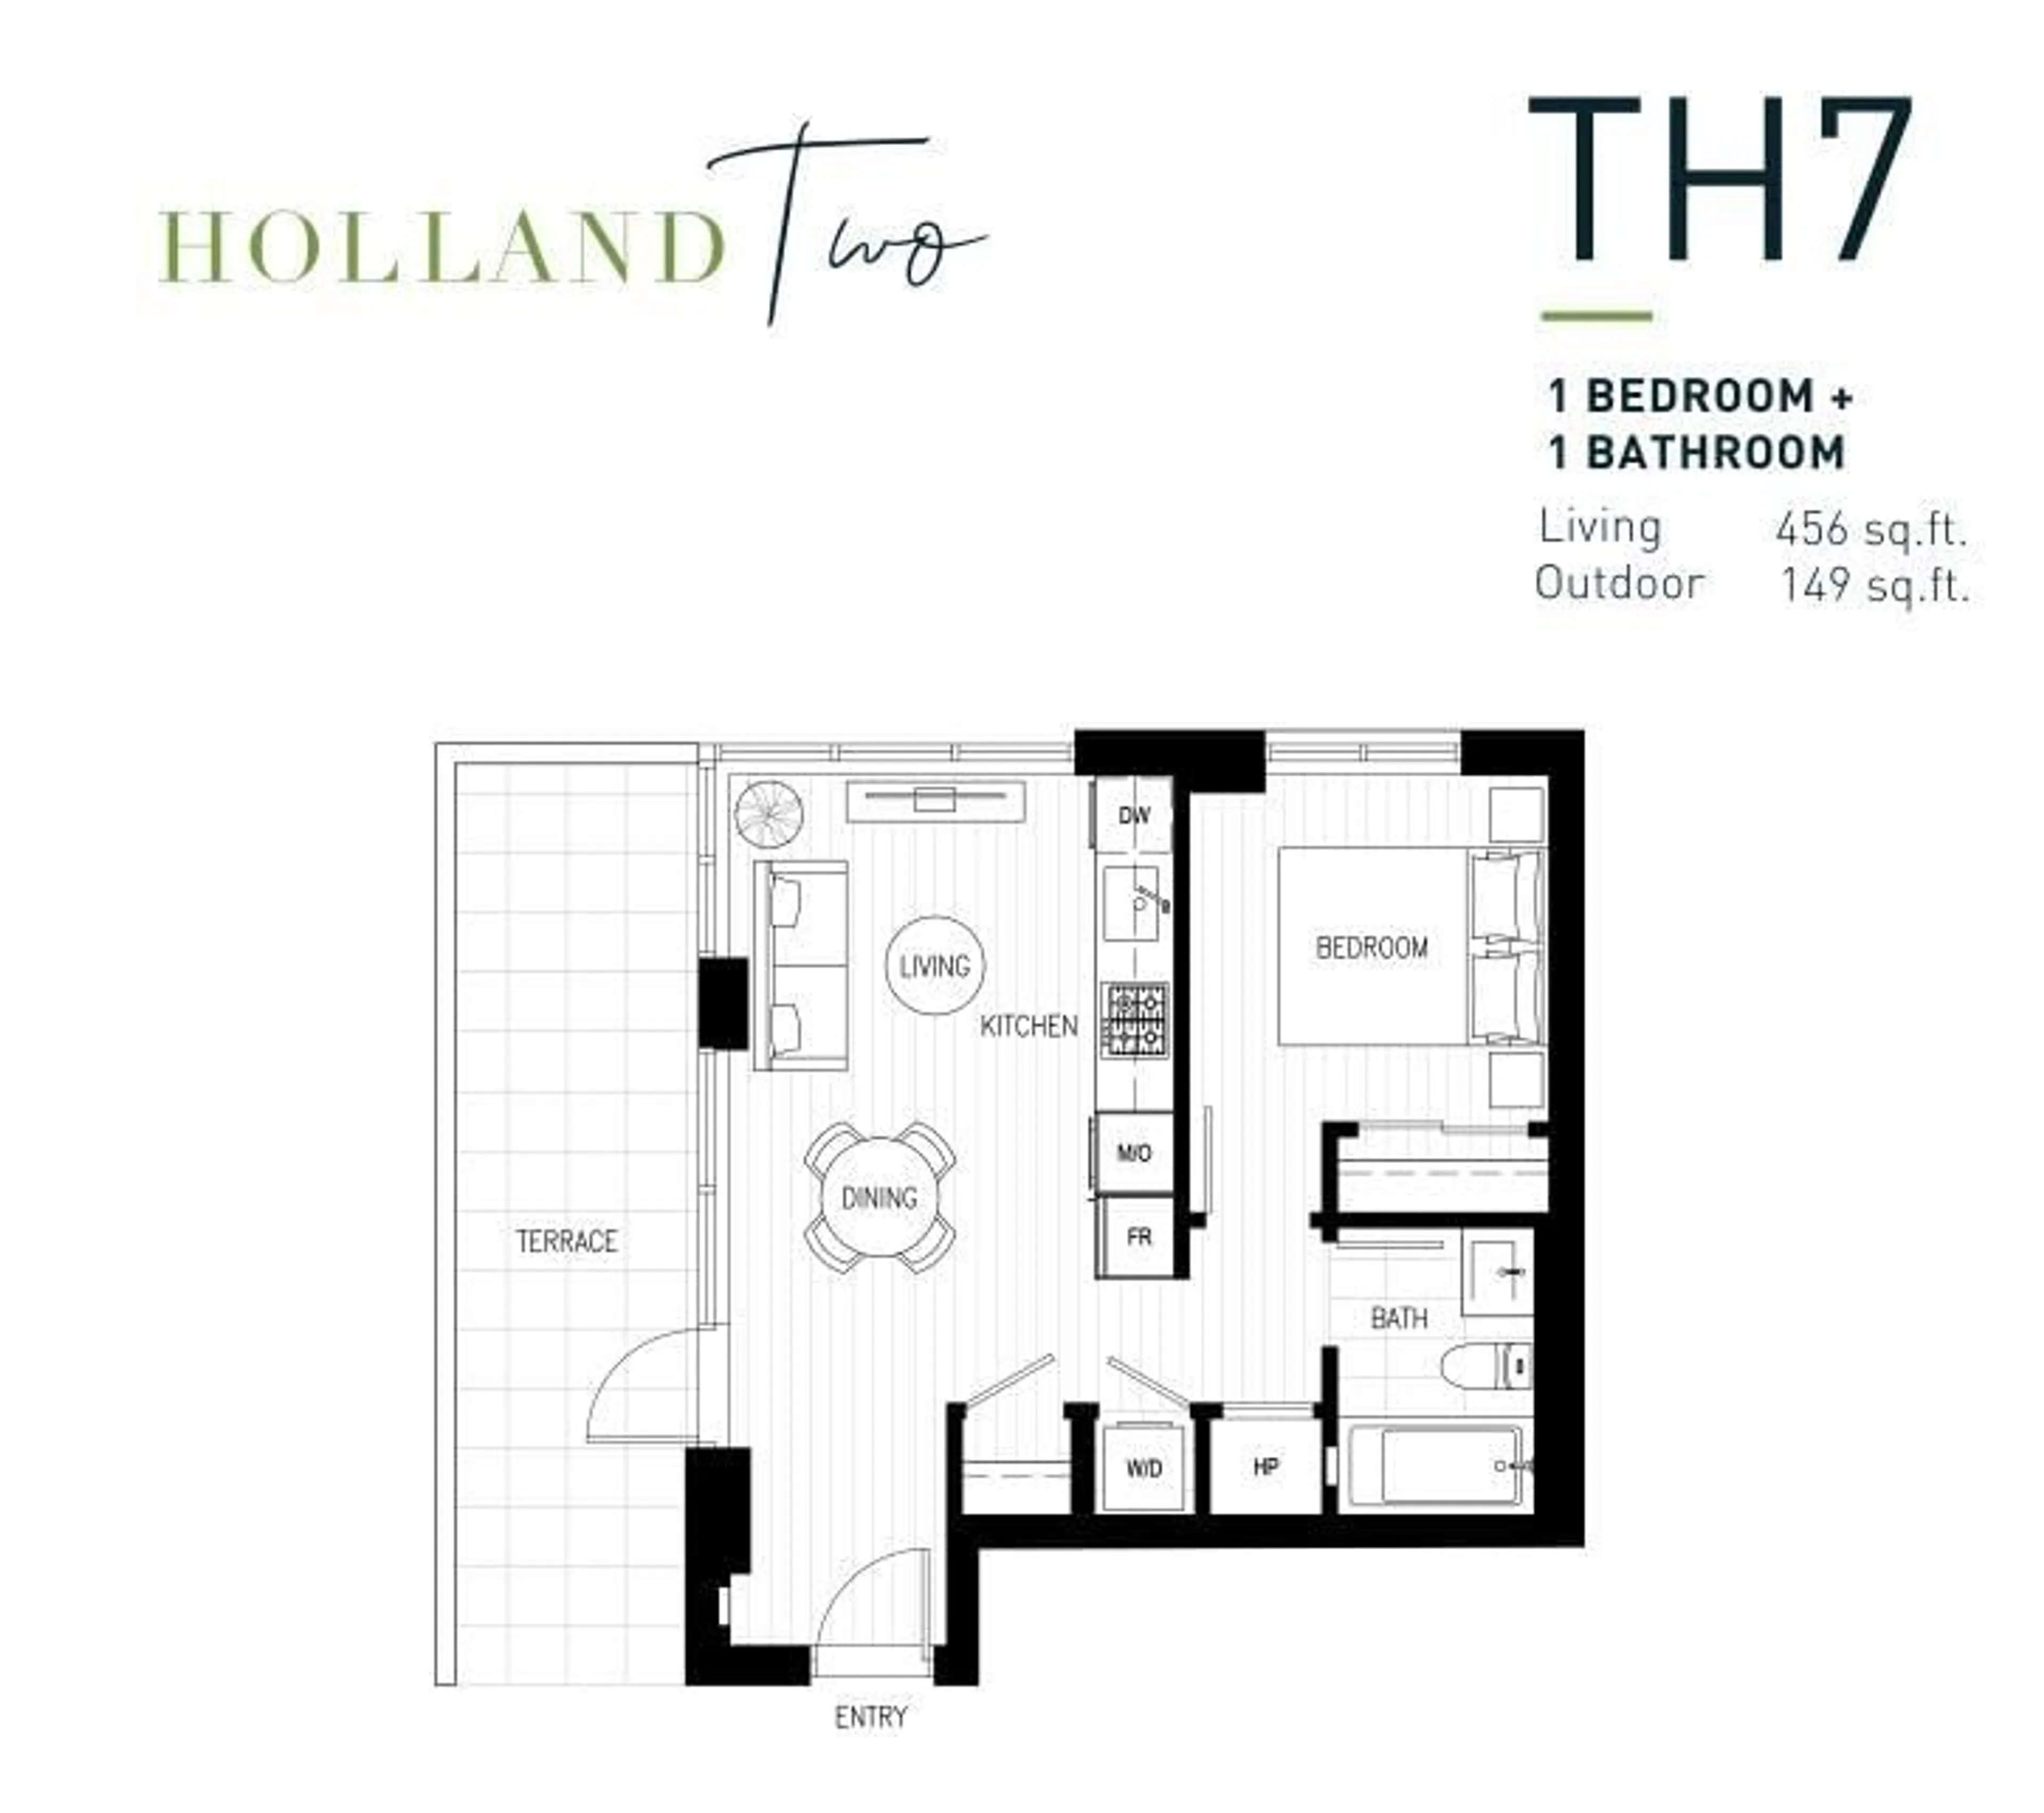 Floor plan for TH7 13387 OLD YALE ROAD, Surrey British Columbia V3T3B1